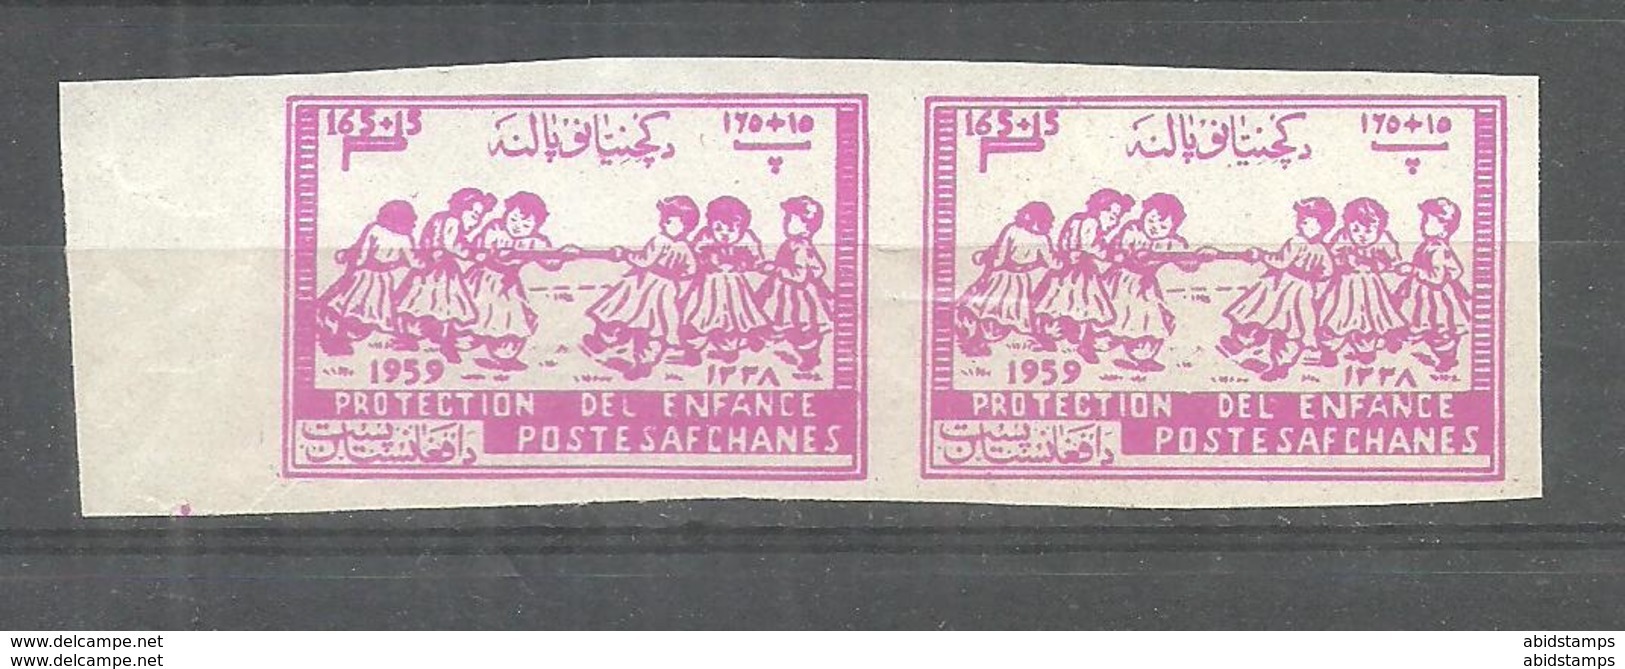 AFGHANISTAN STAMPS 1959  IMPERF PAIR MNH - Afghanistan